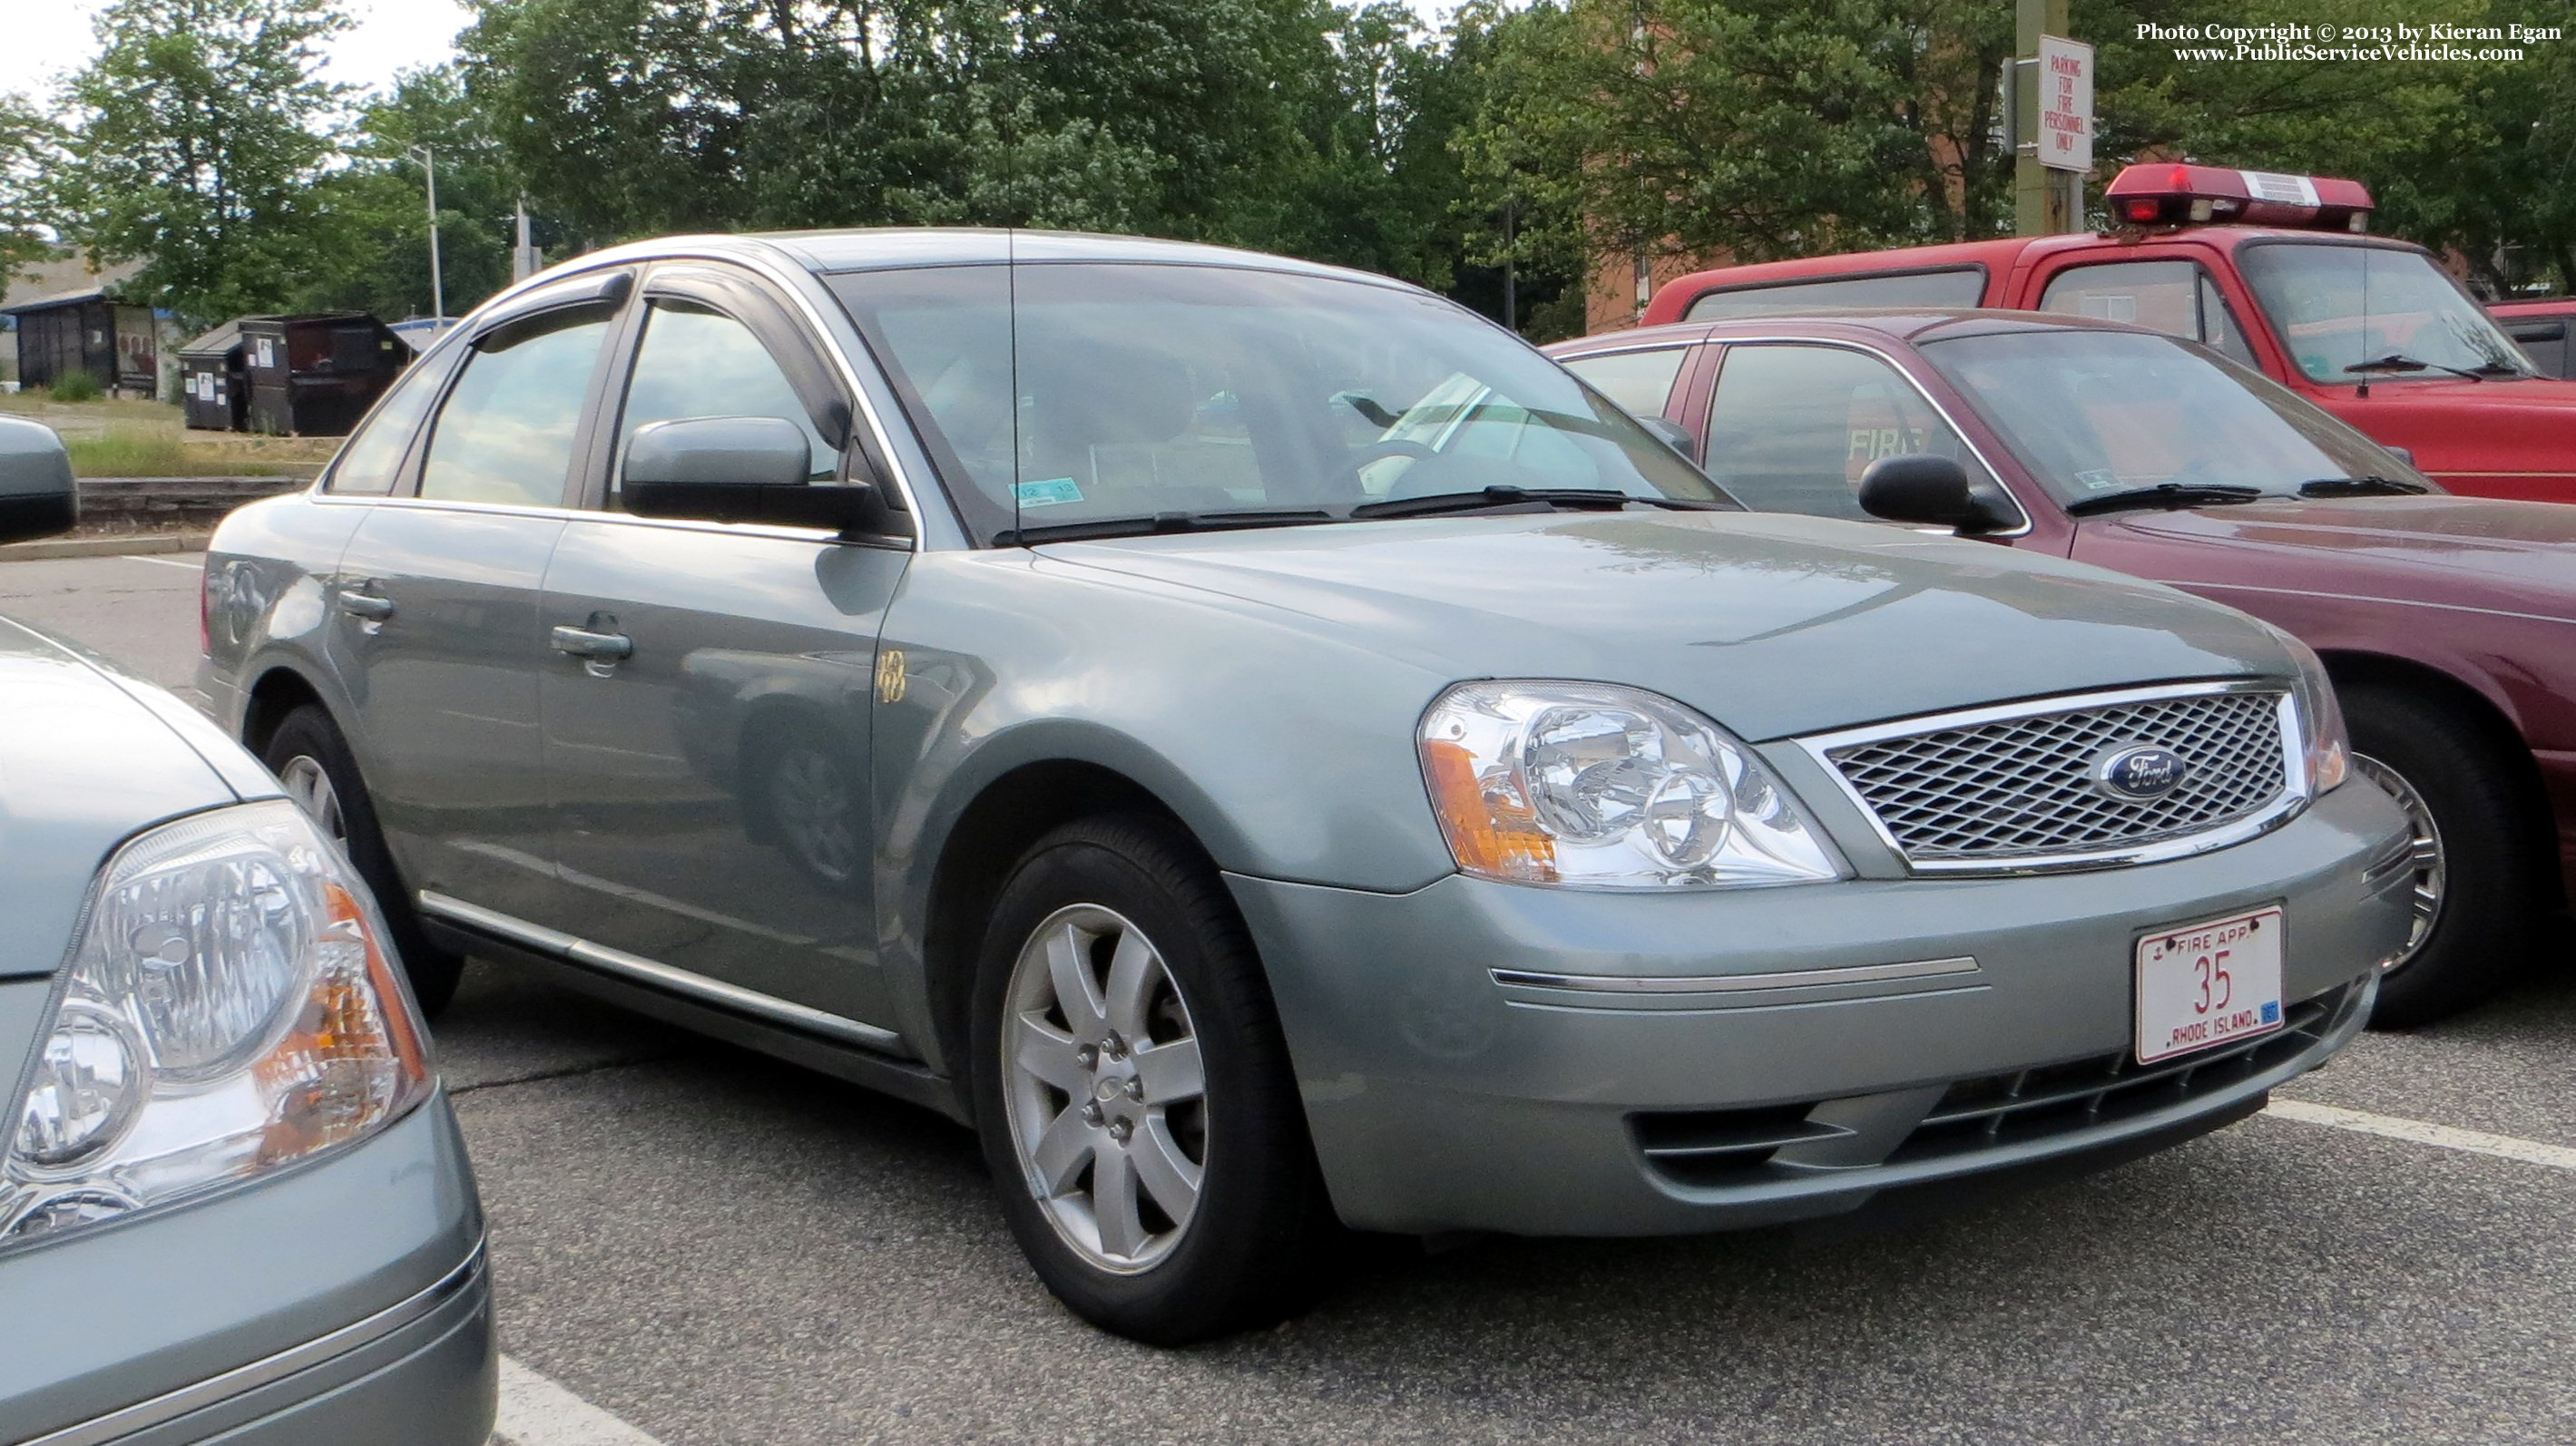 A photo  of Pawtucket Fire
            Captain, a 2005-2007 Ford Five Hundred             taken by Kieran Egan